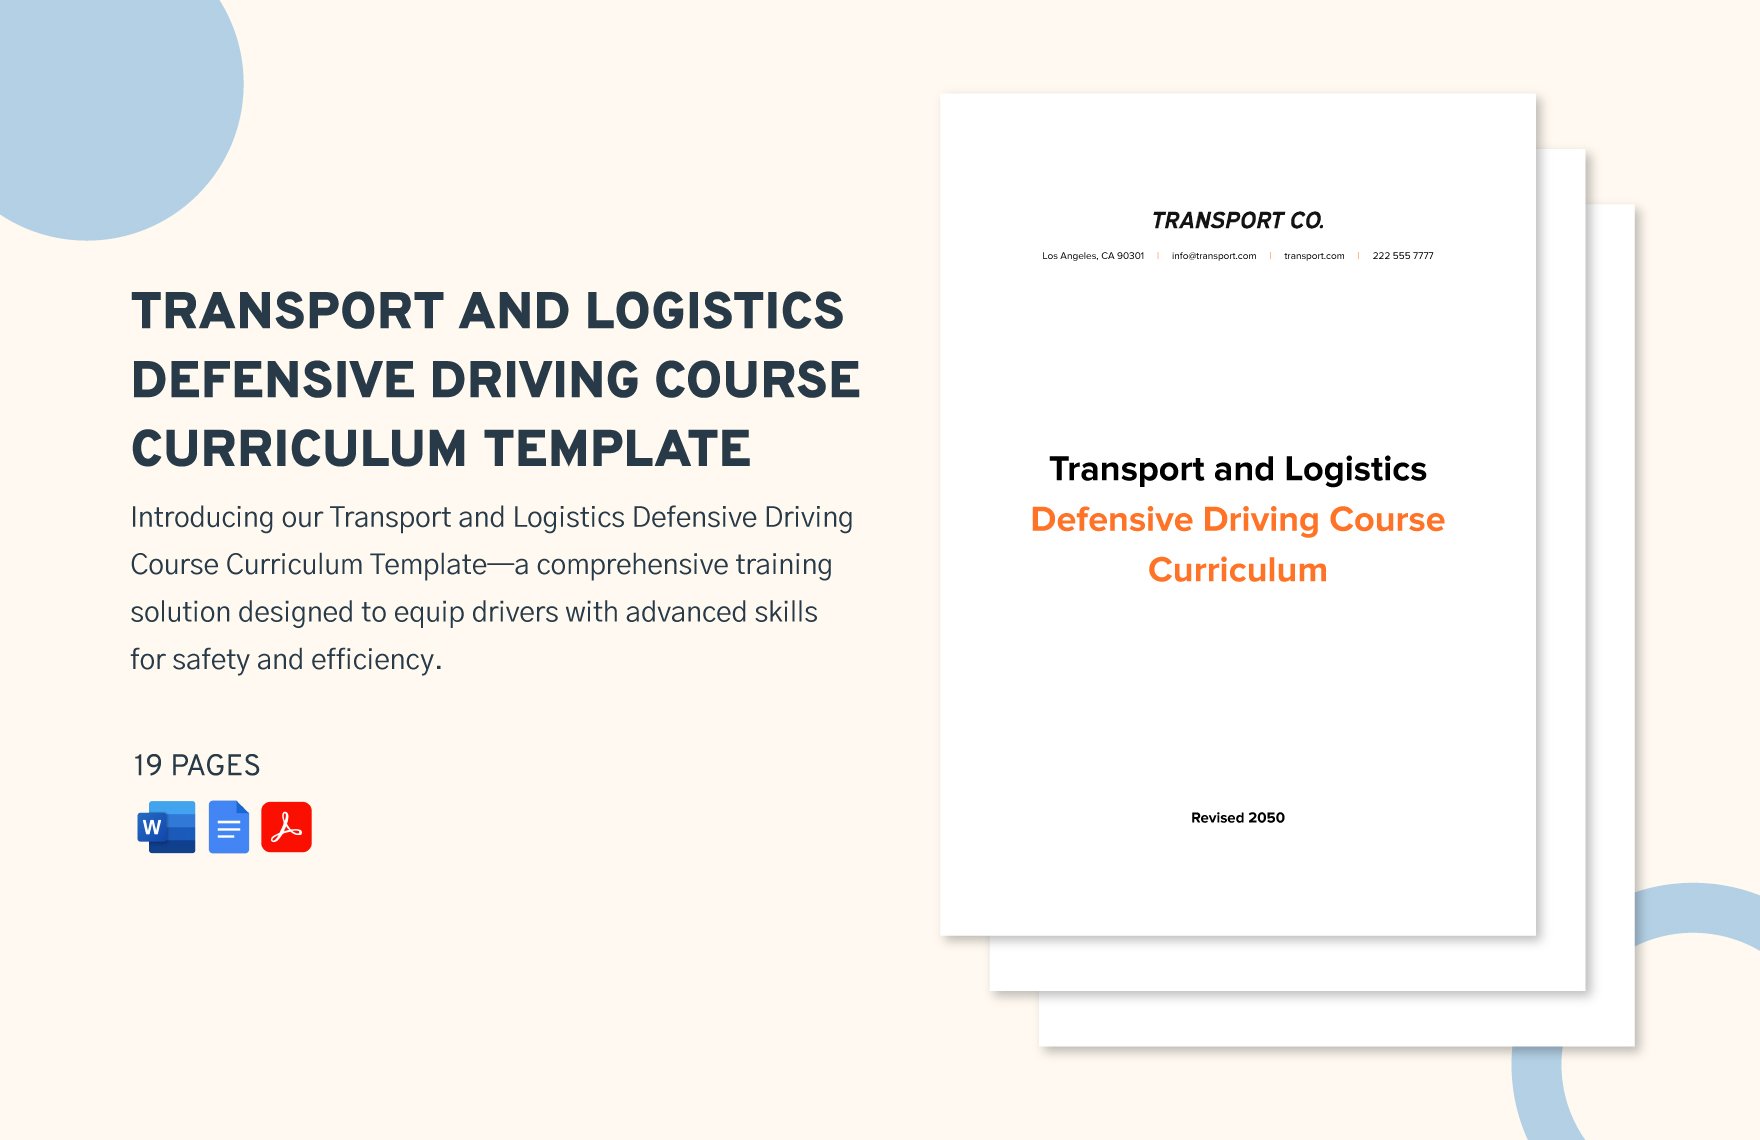 Transport and Logistics Defensive Driving Course Curriculum Template